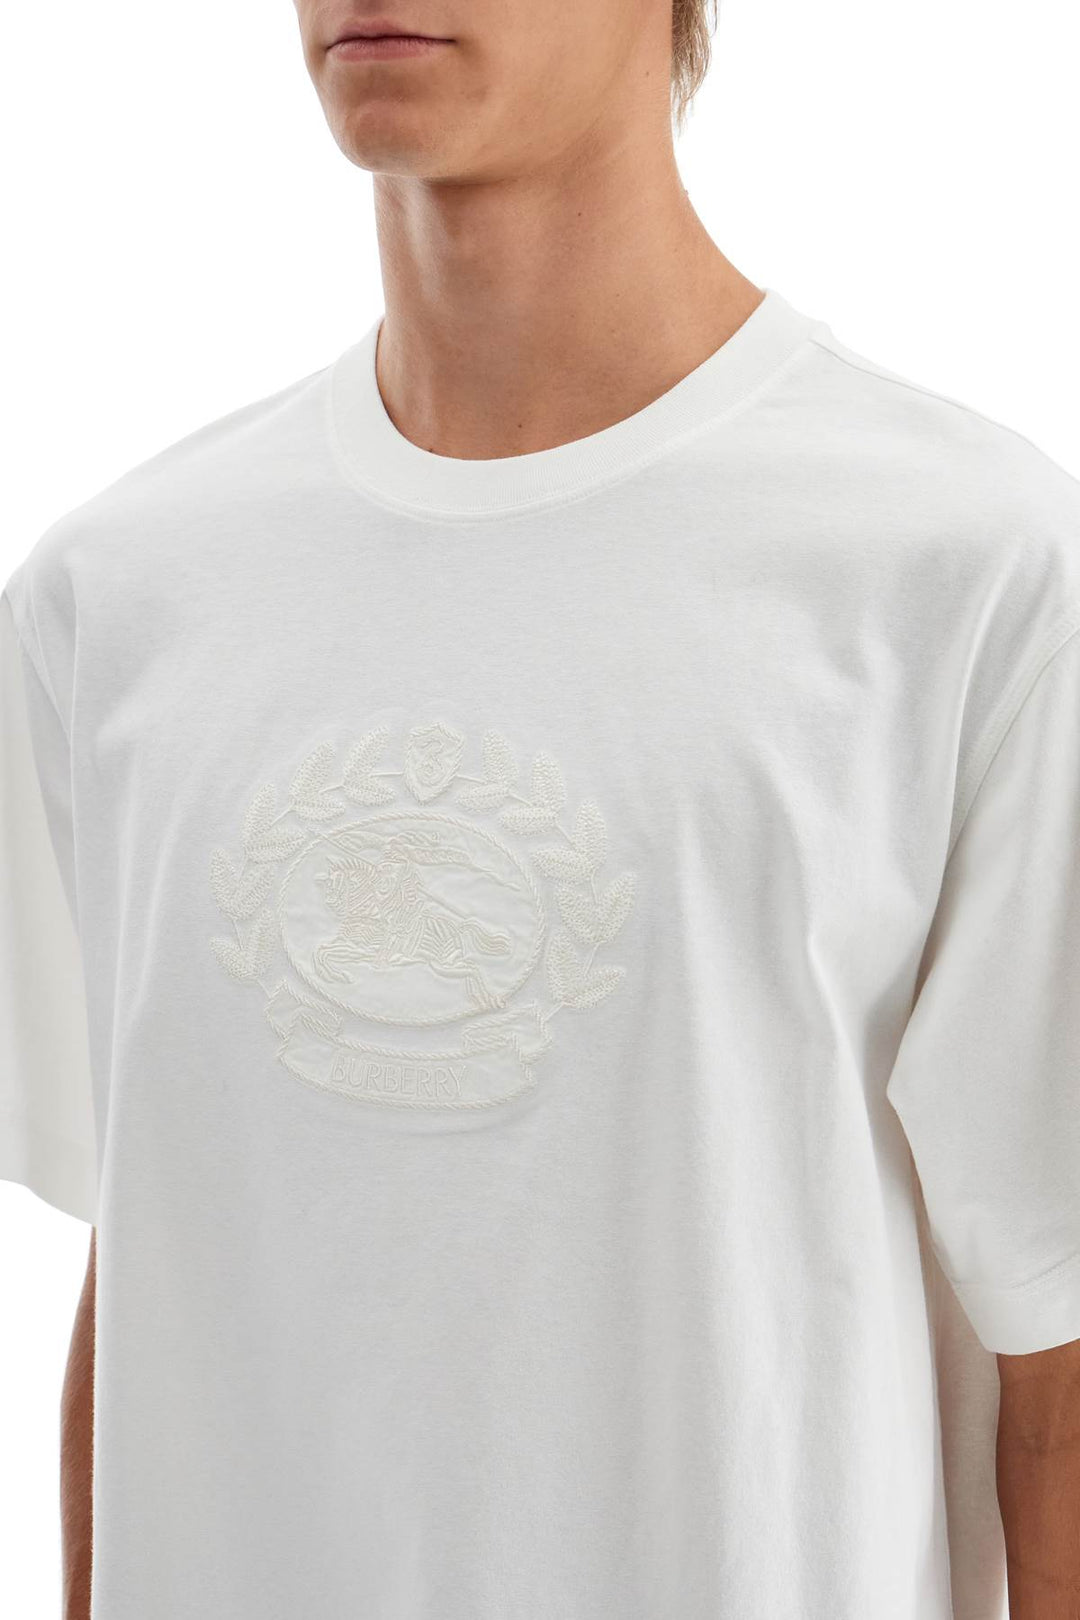 Burberry Ekd Embroidered T Shirt   White